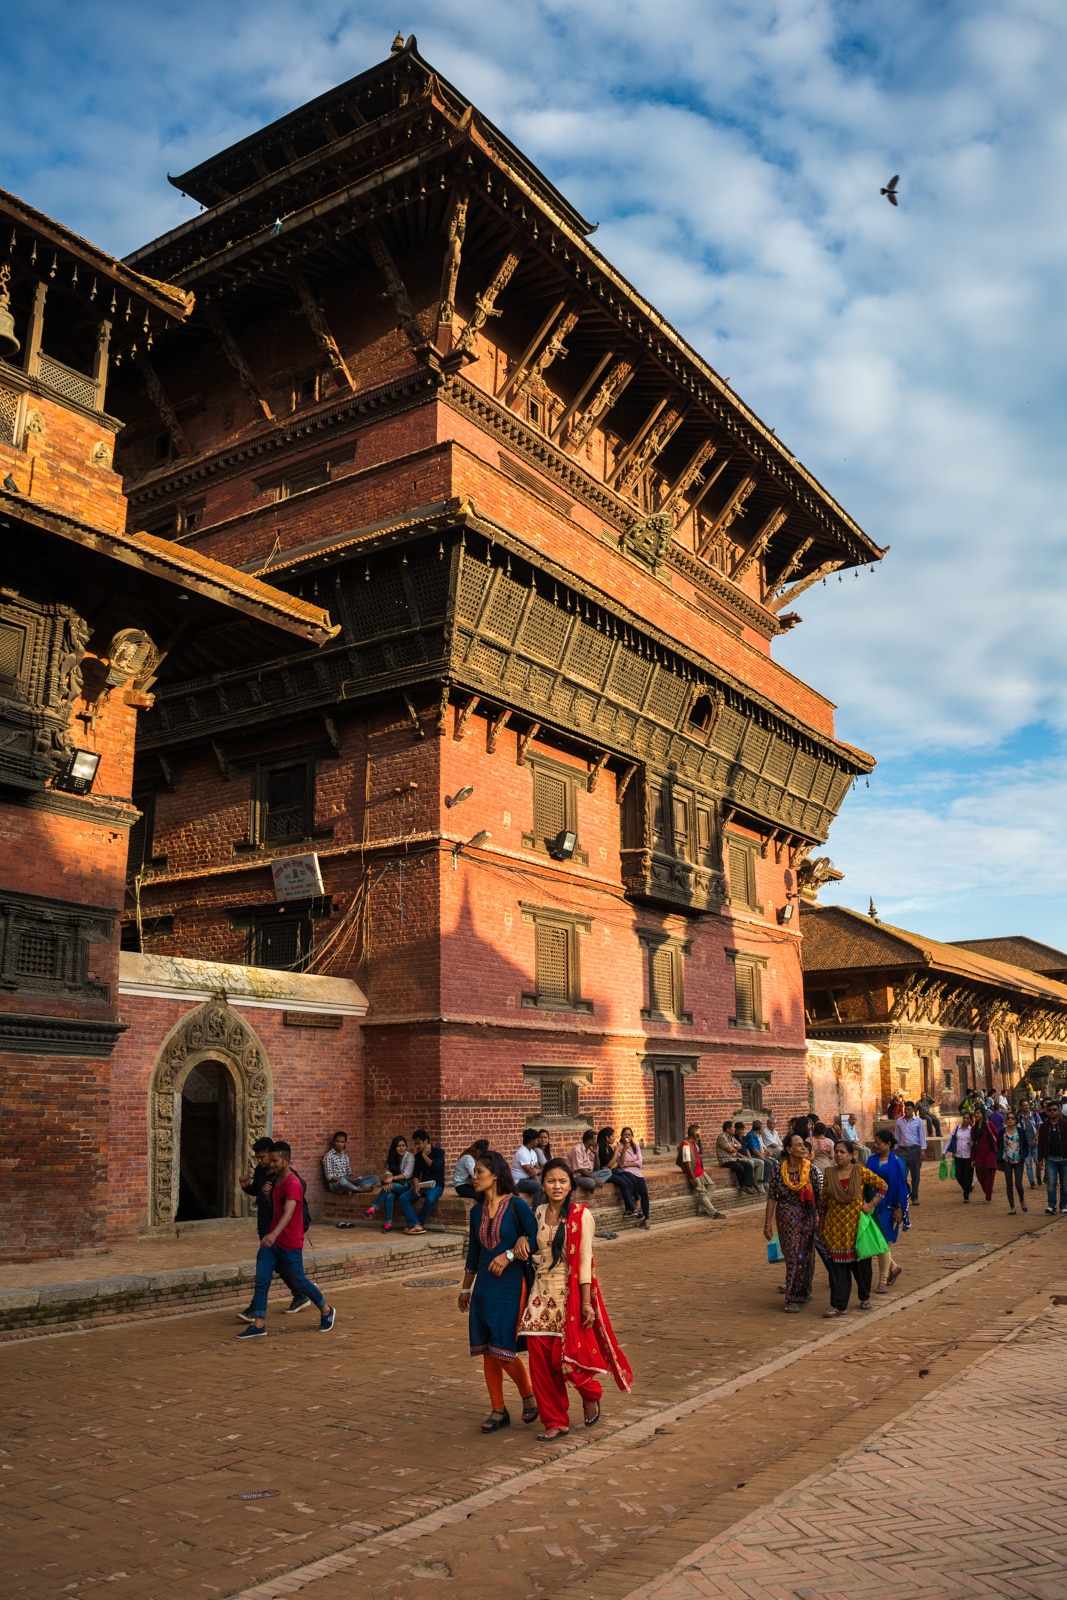 Warm colors during sunset at the famous Durbar Square in Patan, Nepal. Only half an hour's drive from the Thamel area of Kathmandu, Patan is a top destination for anyone traveling to the Kathmandu Valley.